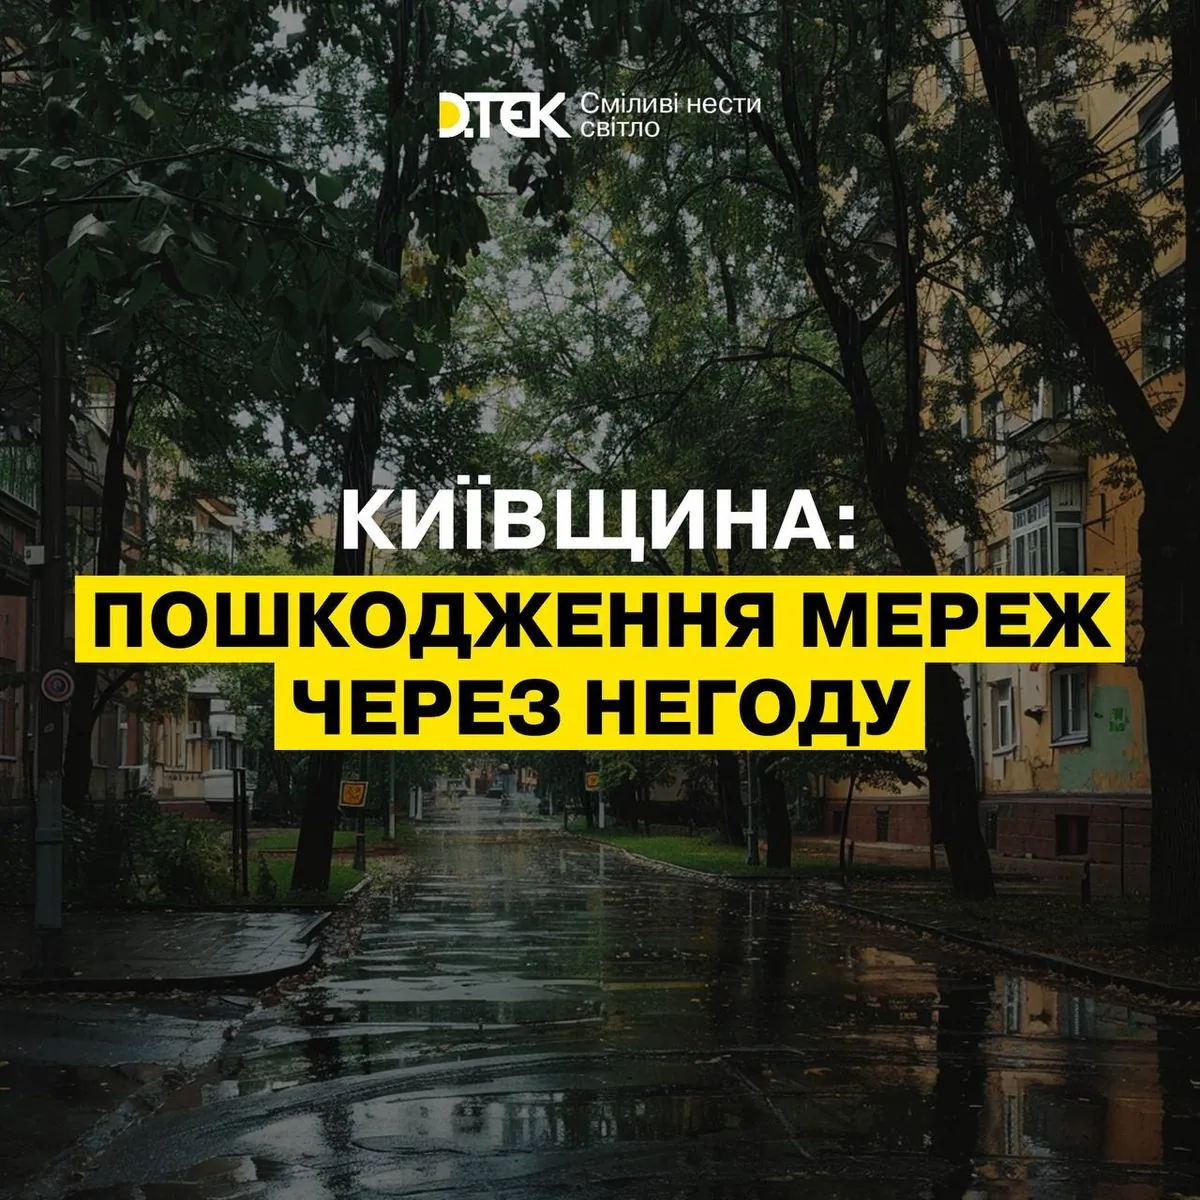 thunderstorm-caused-emergency-power-outages-in-kyiv-region-what-is-known